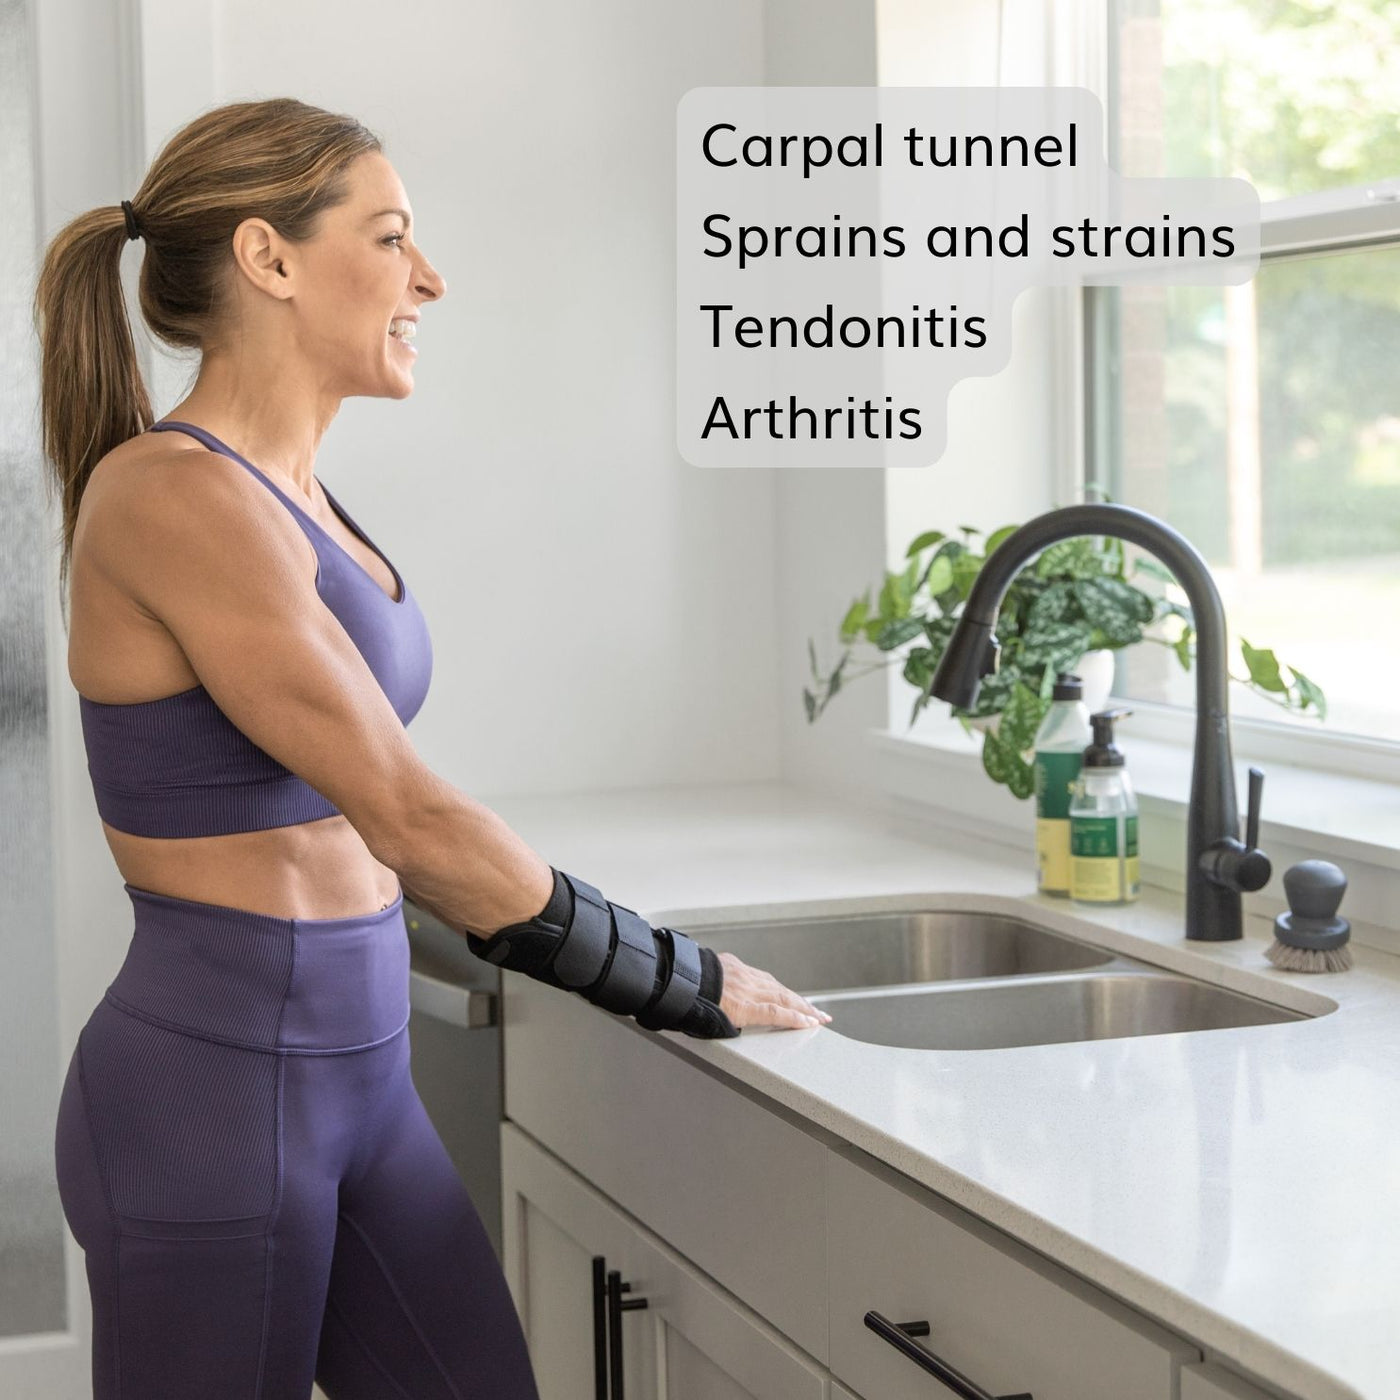 The fingerless wrist brace is perfect for carpal tunnel, wrist sprains, and tendonitis